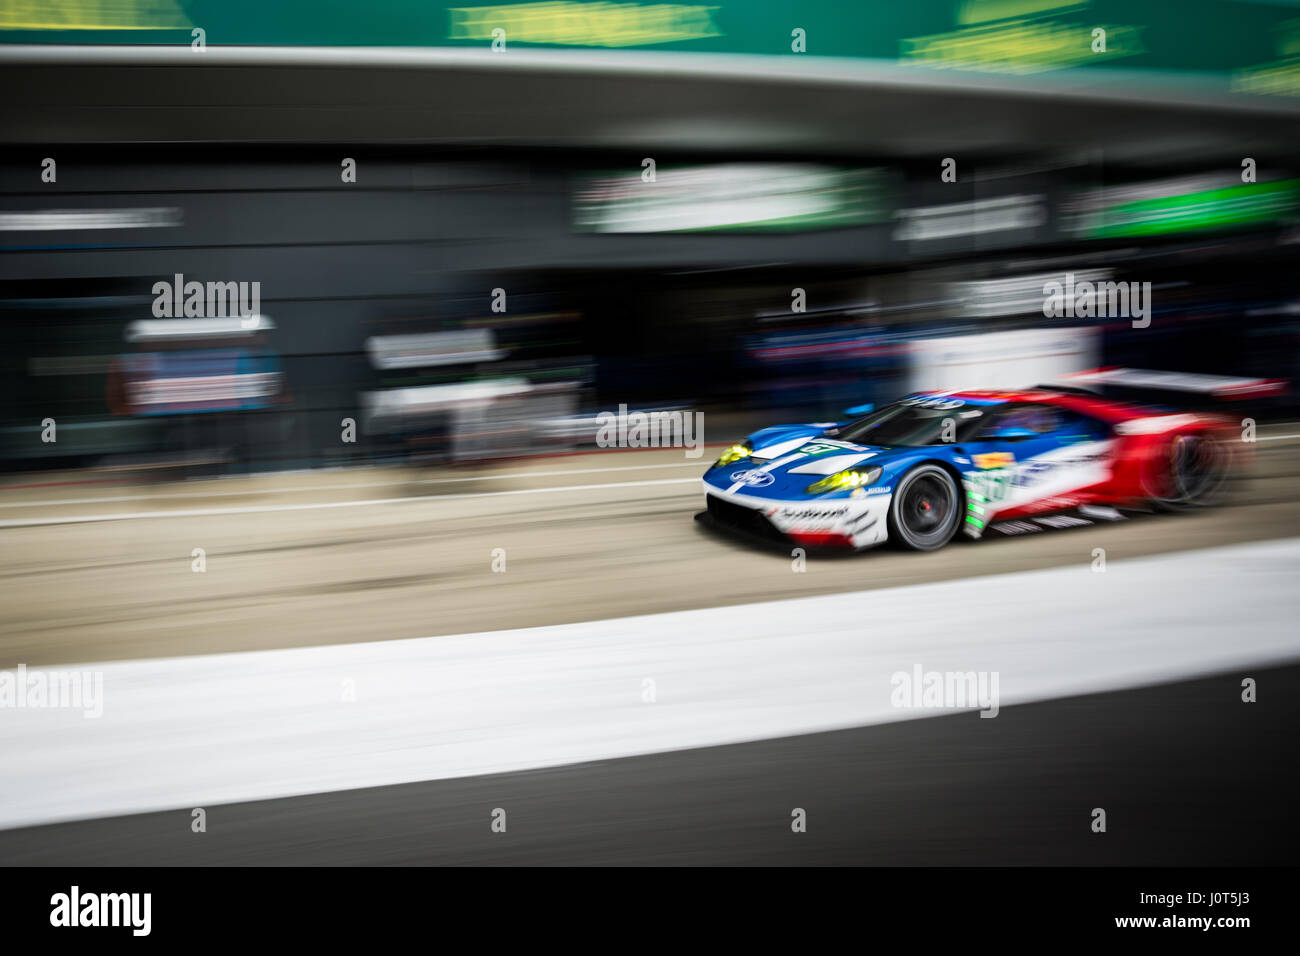 Towcester, Northamptonshire, UK. 16th Apr, 2017. FIA WEC racing team Ford Chip Ganassi Team UK during the 6 Hours of Silverstone of the FIA World Endurance Championship Autograph session at Silverstone Circuit Credit: Gergo Toth/Alamy Live News Stock Photo